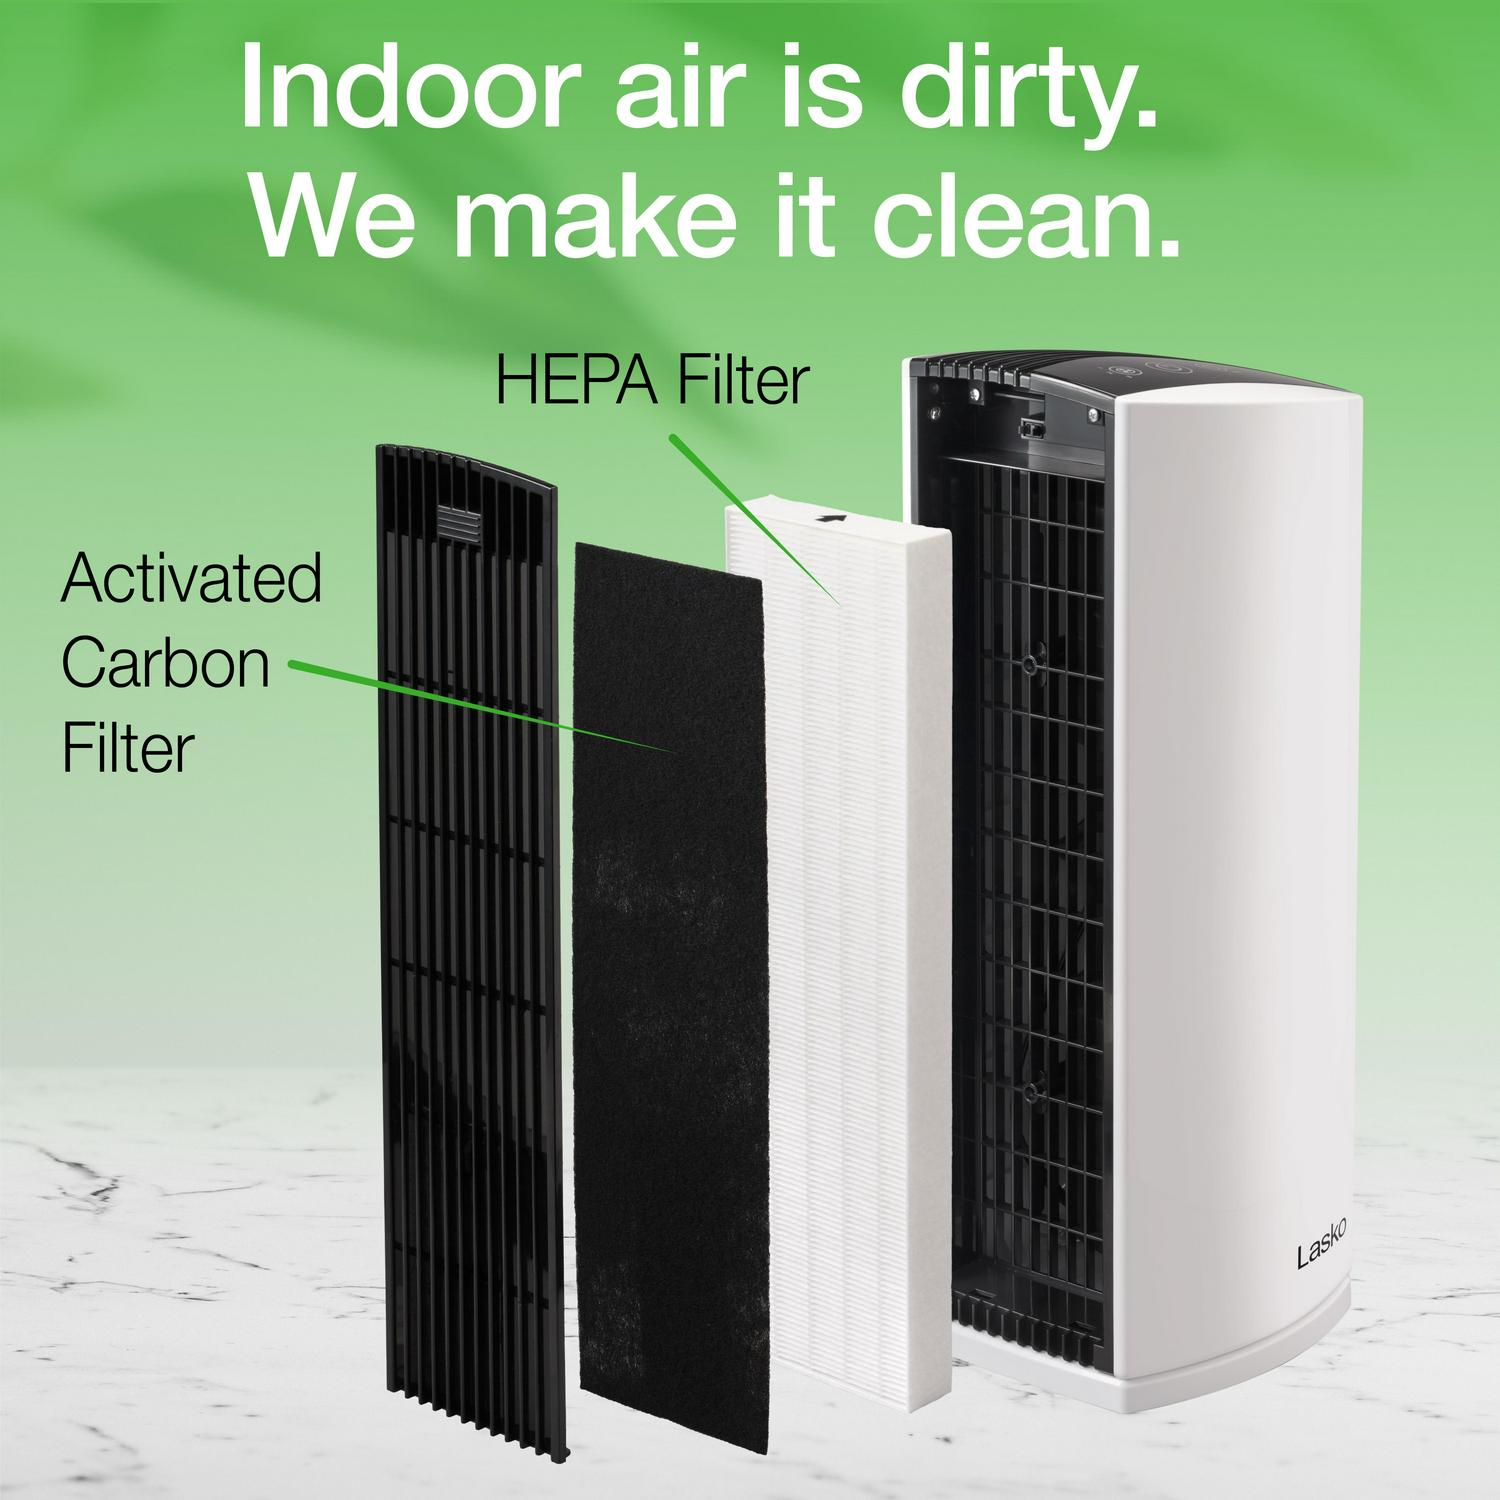 Lasko LP300 HEPA Tower Air Purifier with Timer for a Cleaner， Fresher Home Environment， LP300， White